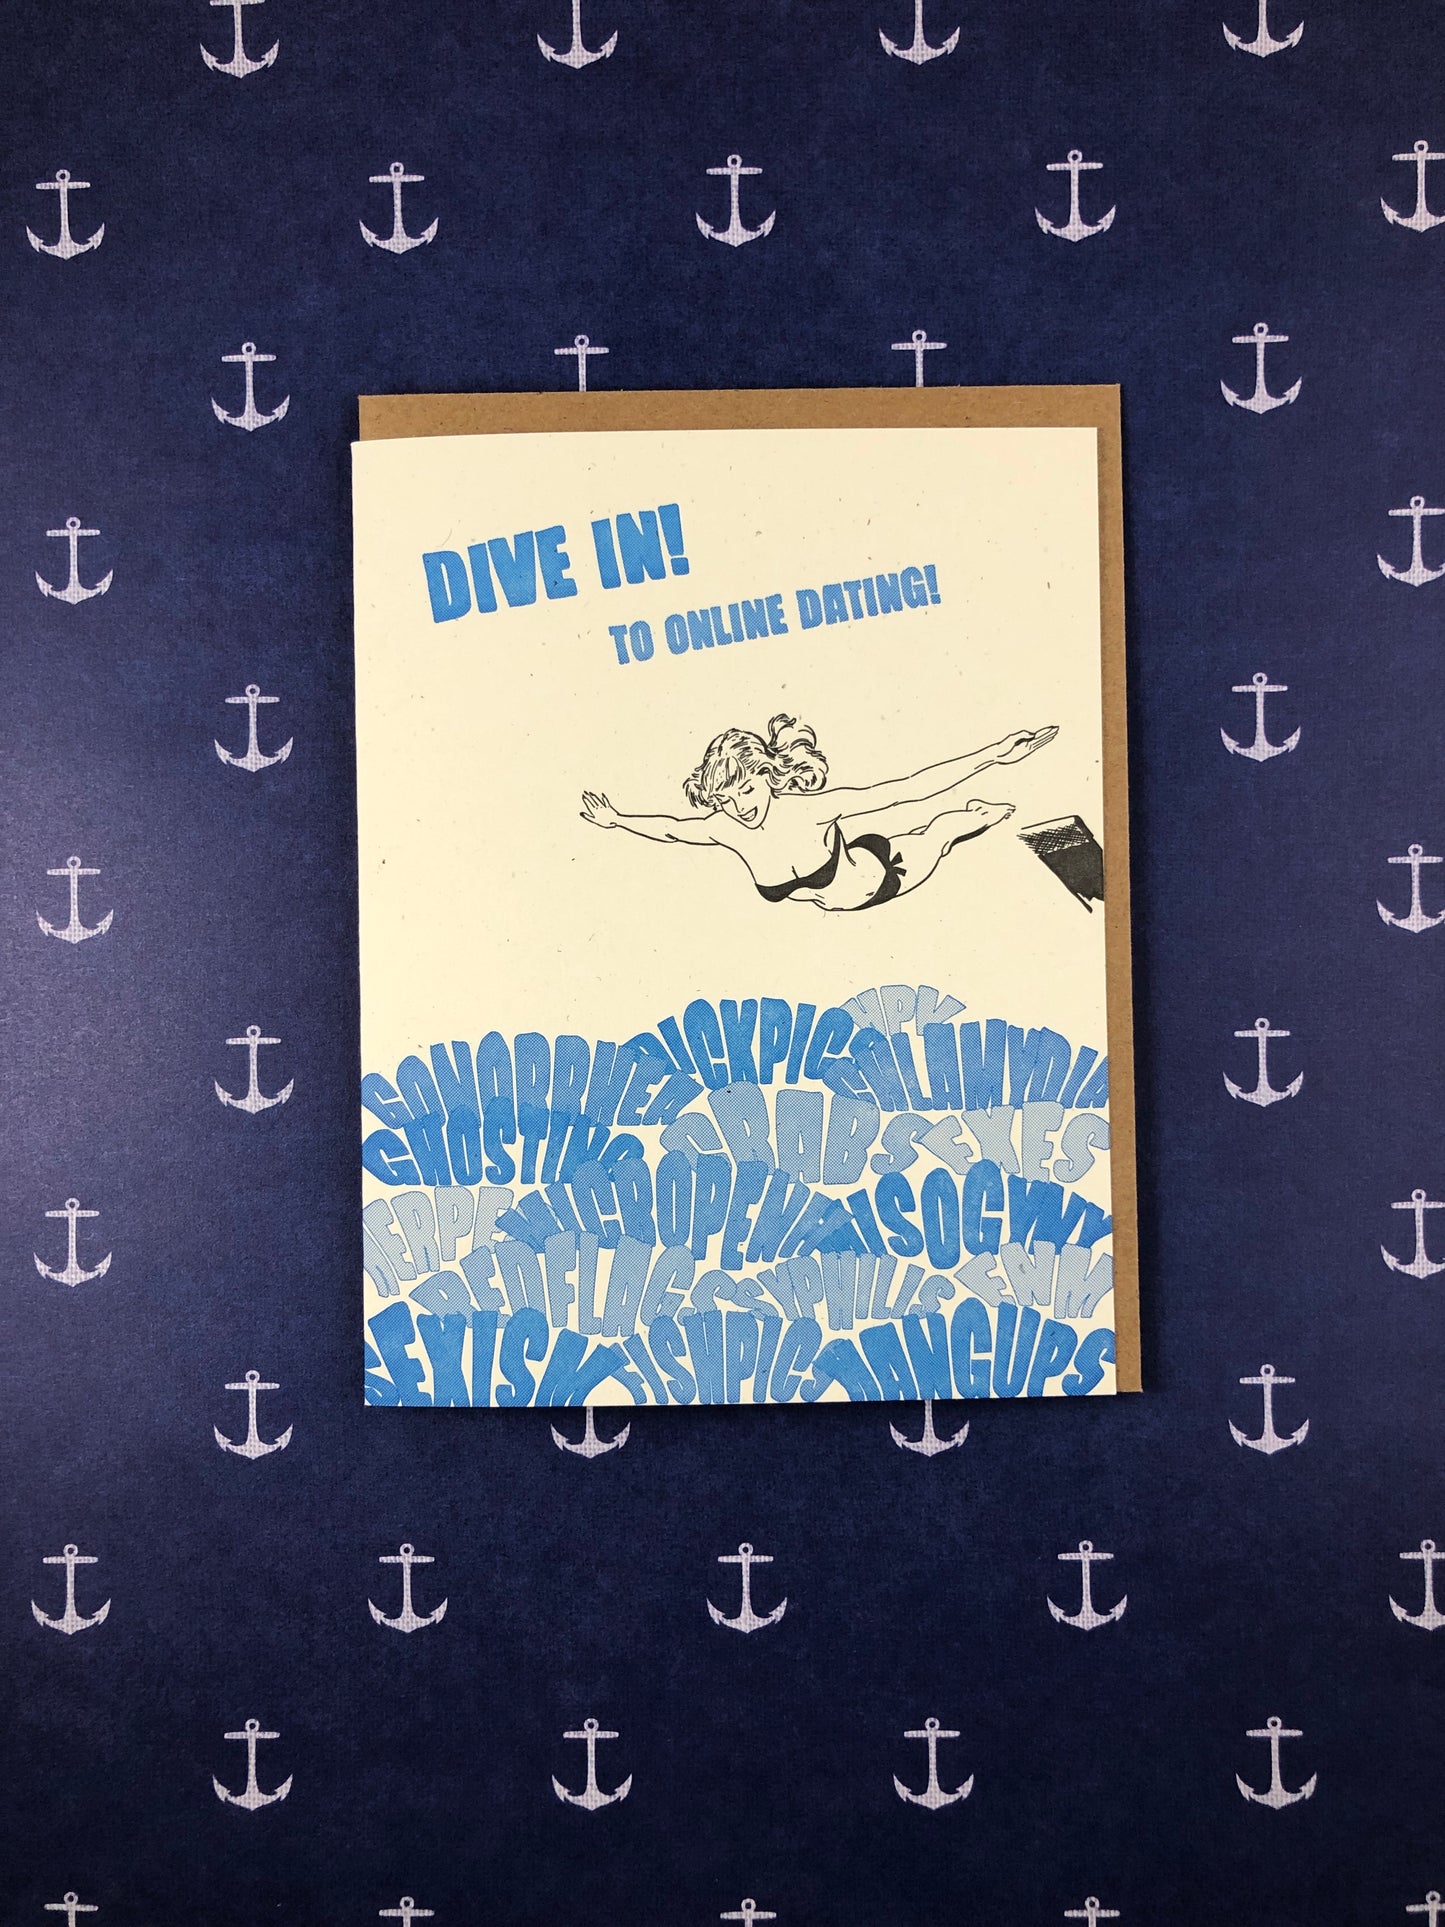 Dive In to Online Dating Funny Letterpress Greeting Card